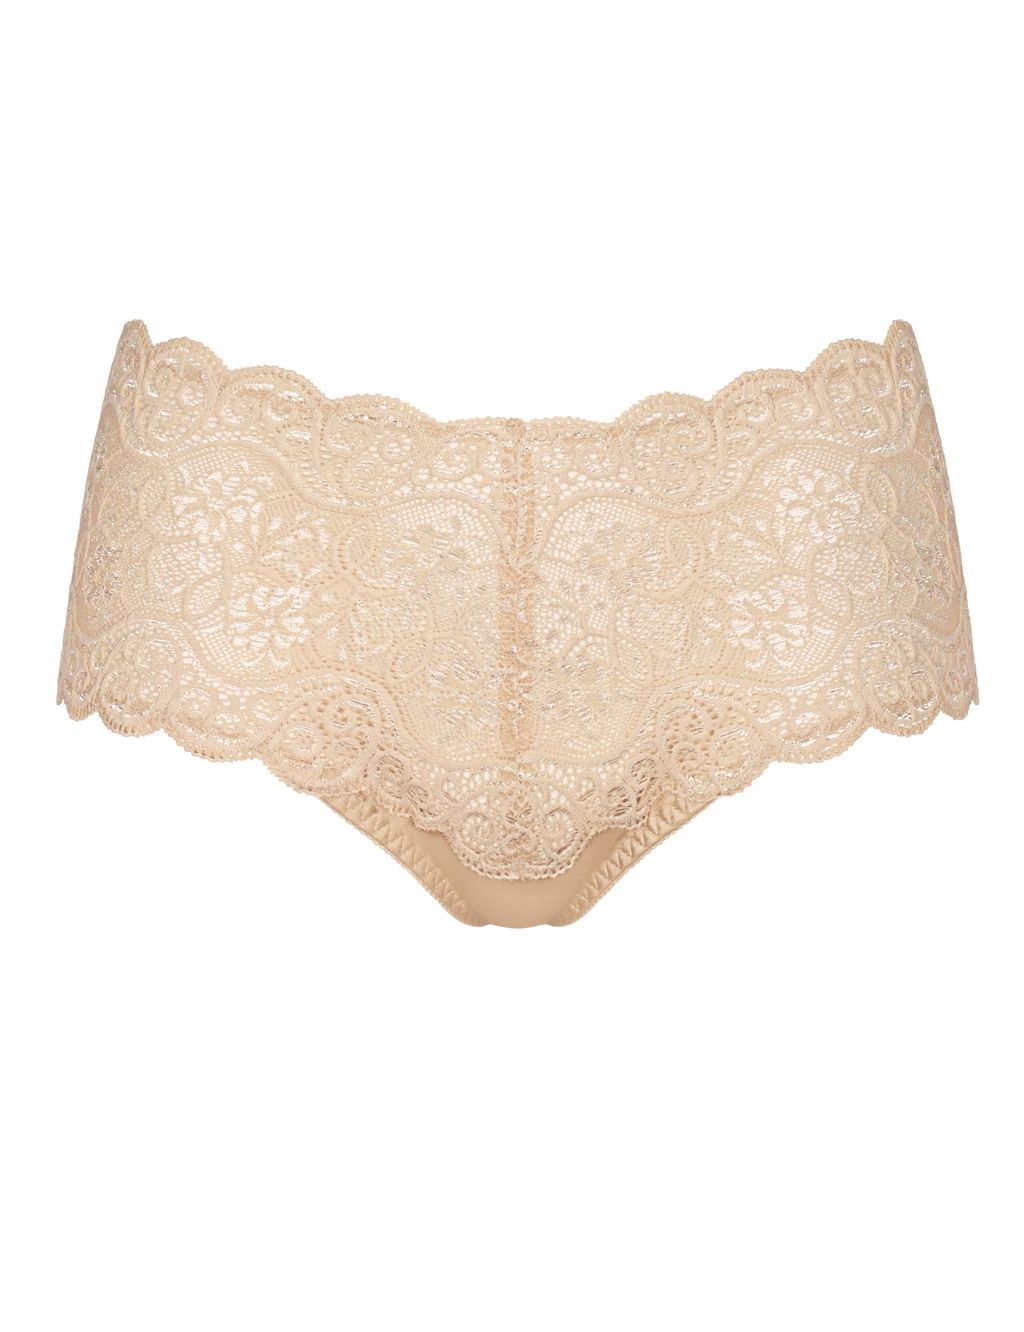 Amourette 300 All Over Lace Full Briefs 1 of 3